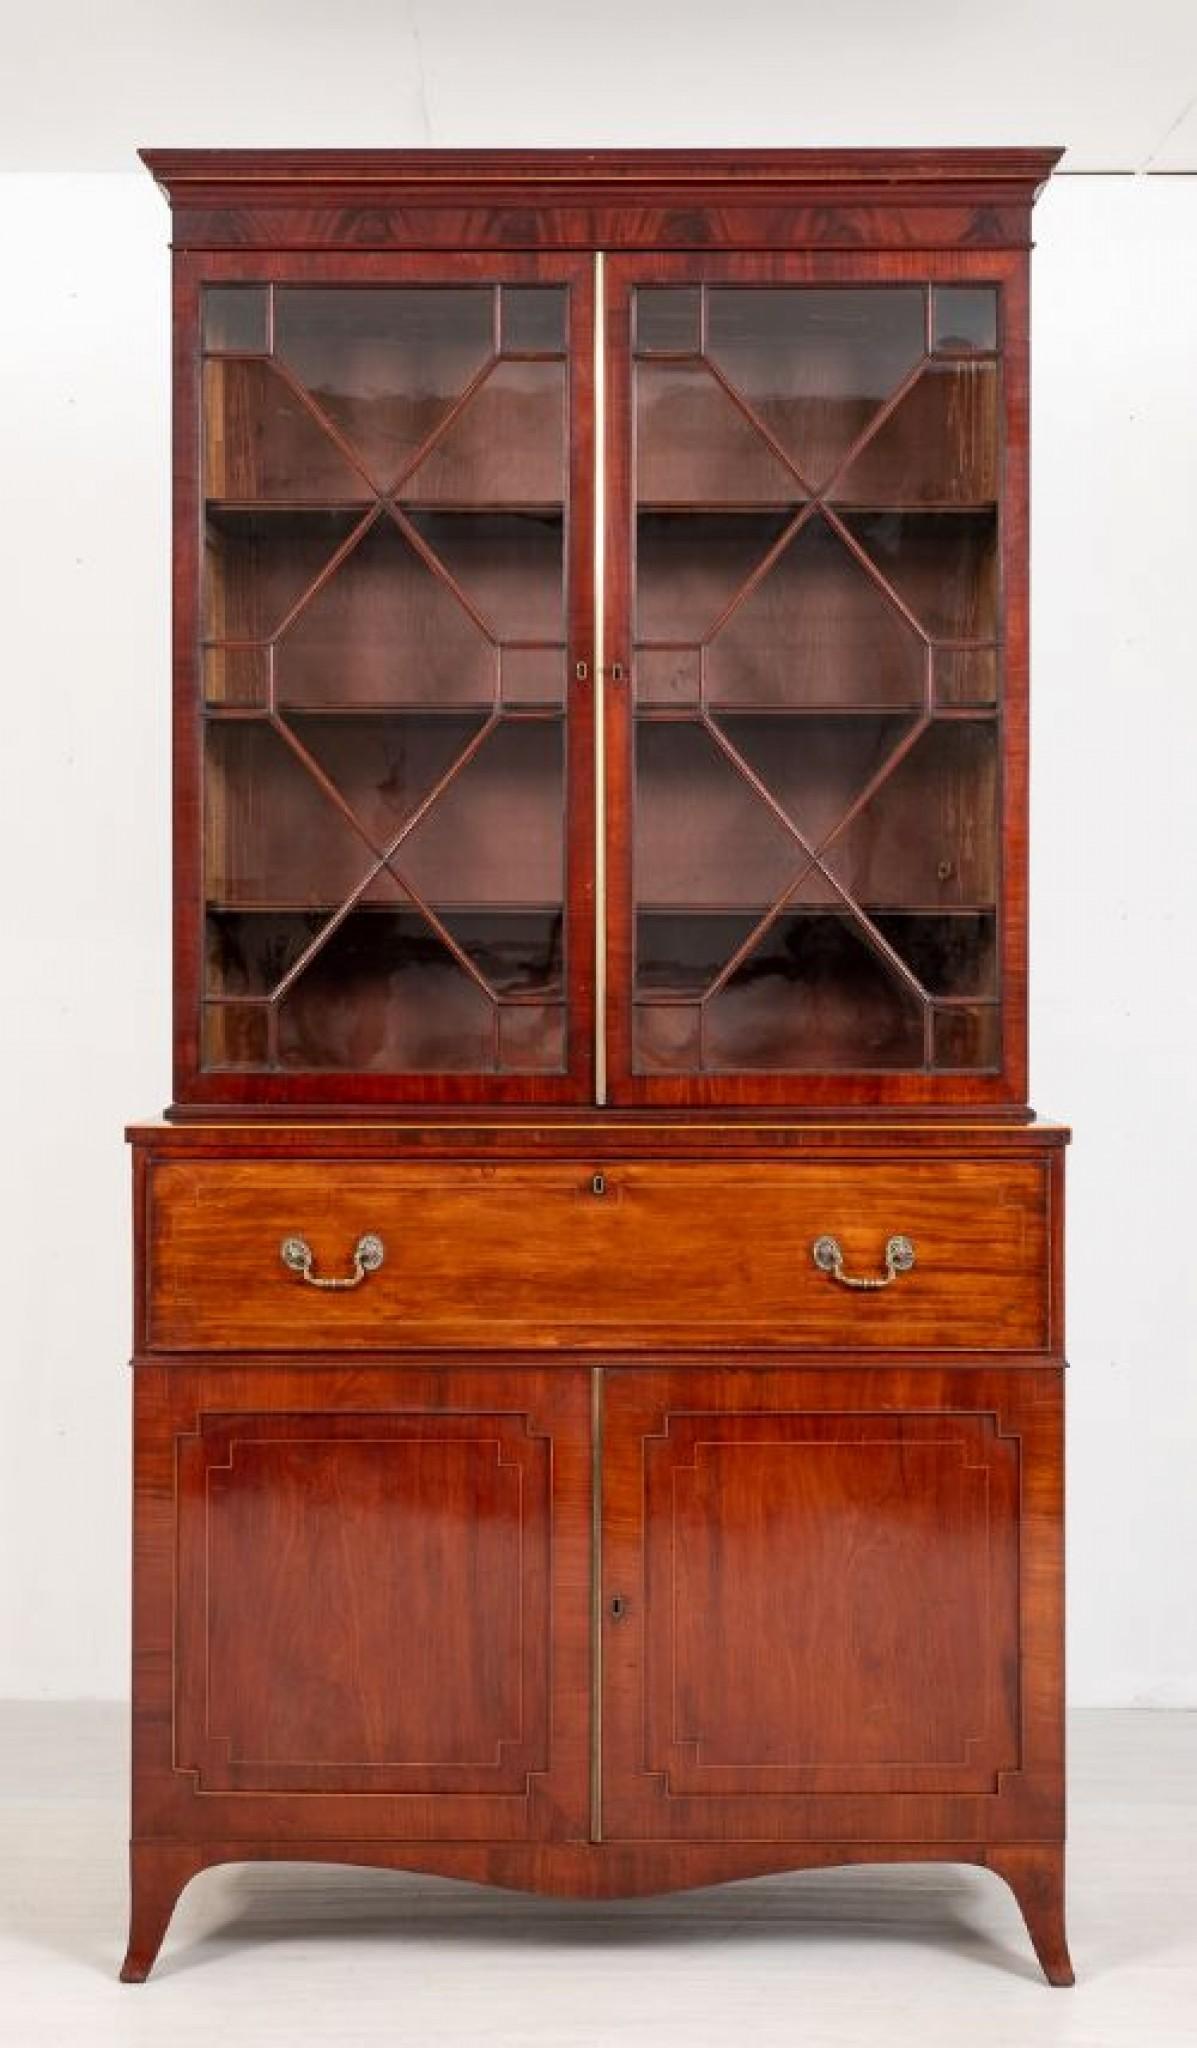 Regency Mahogany Secretaire Bookcase.
This Quality Bookcase Stands Upon Splay Feet with a Shaped Apron.
2 panelled Doors with Boxwood Line inlays the doors open to reveal 2 Sliding Trays.
The Fall Front Writing Compartment having Ebony and Boxwood